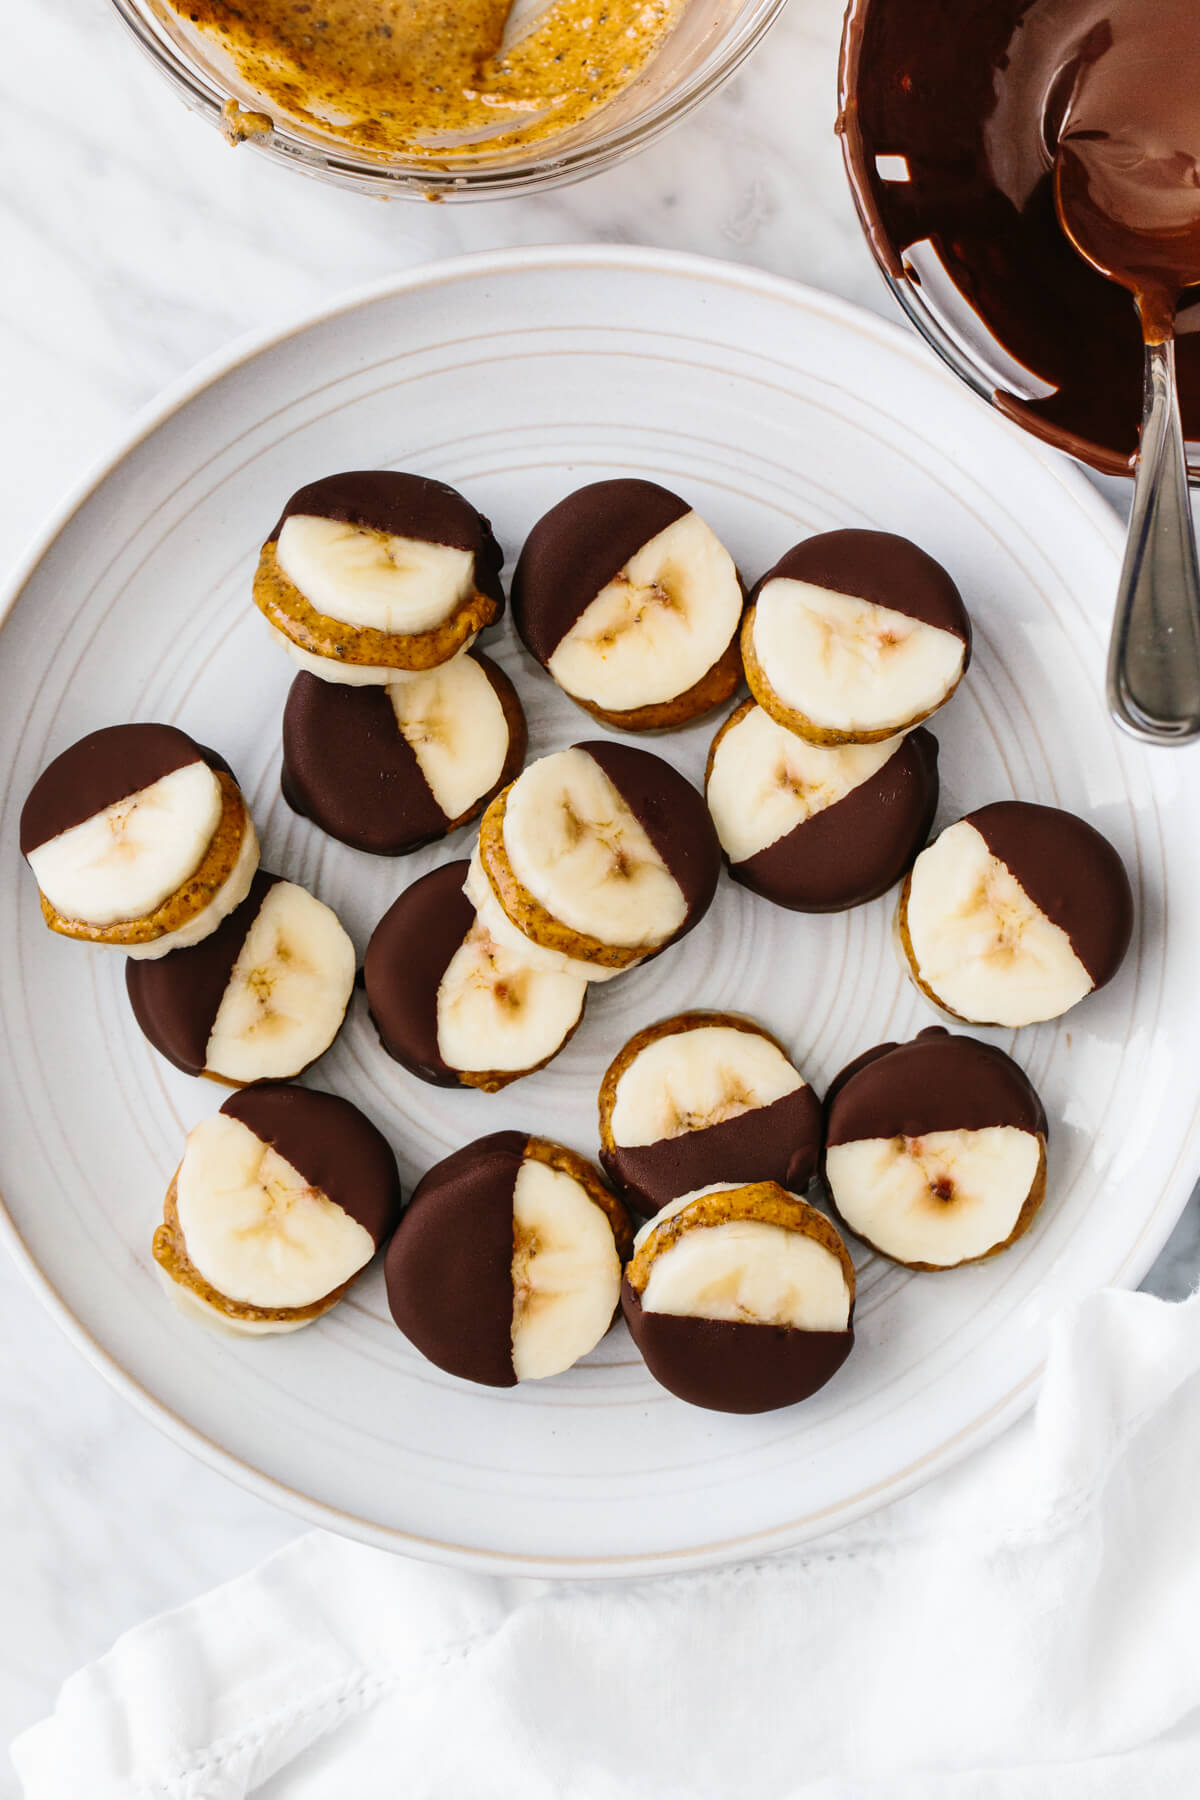 Frozen chocolate banana bites on a plate next to bowls of chocolate and almond butter.